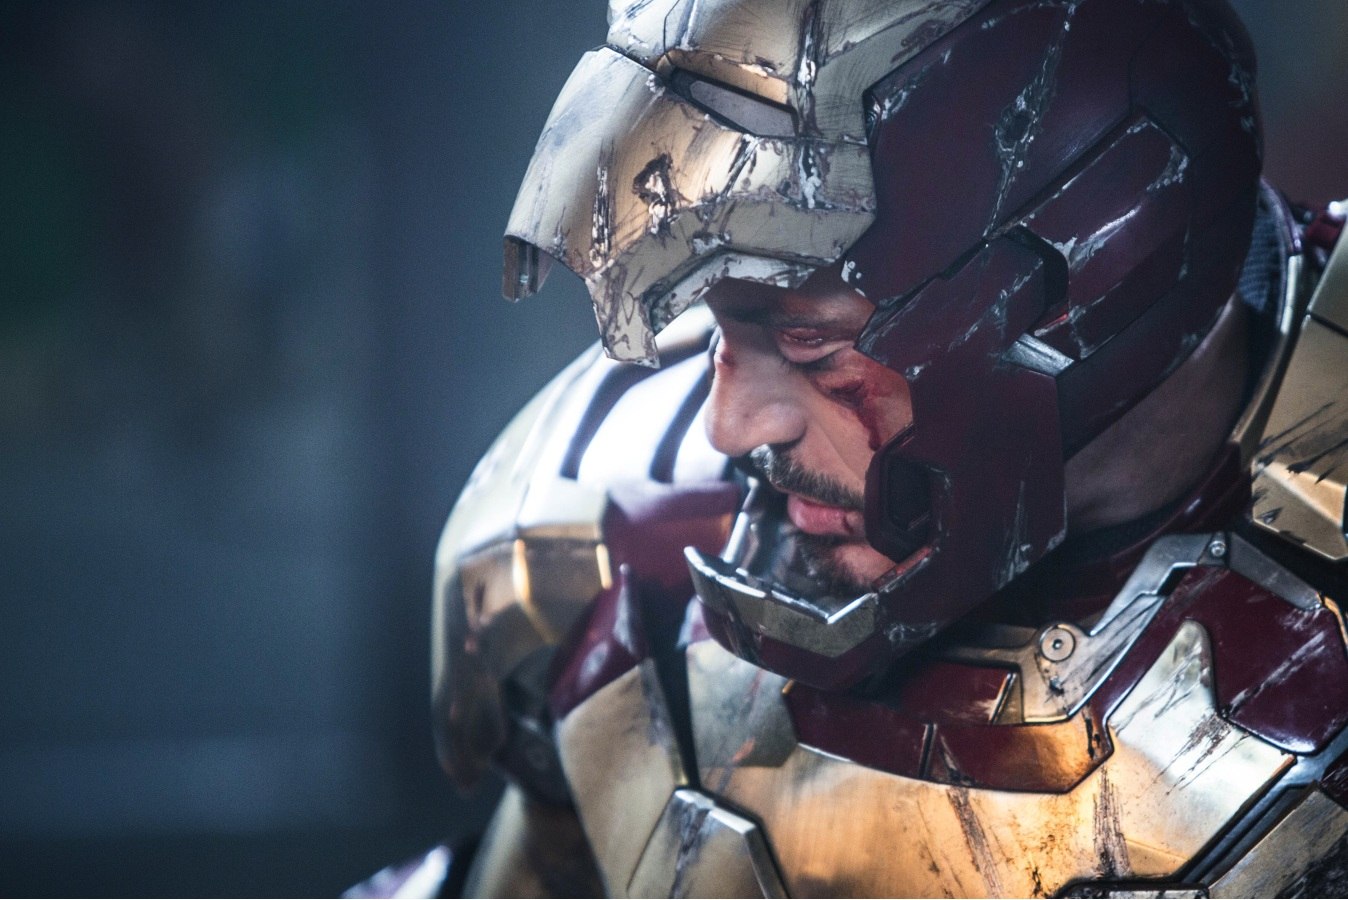 New Iron Man 3 image shows a bloodied Robert Downey Jr